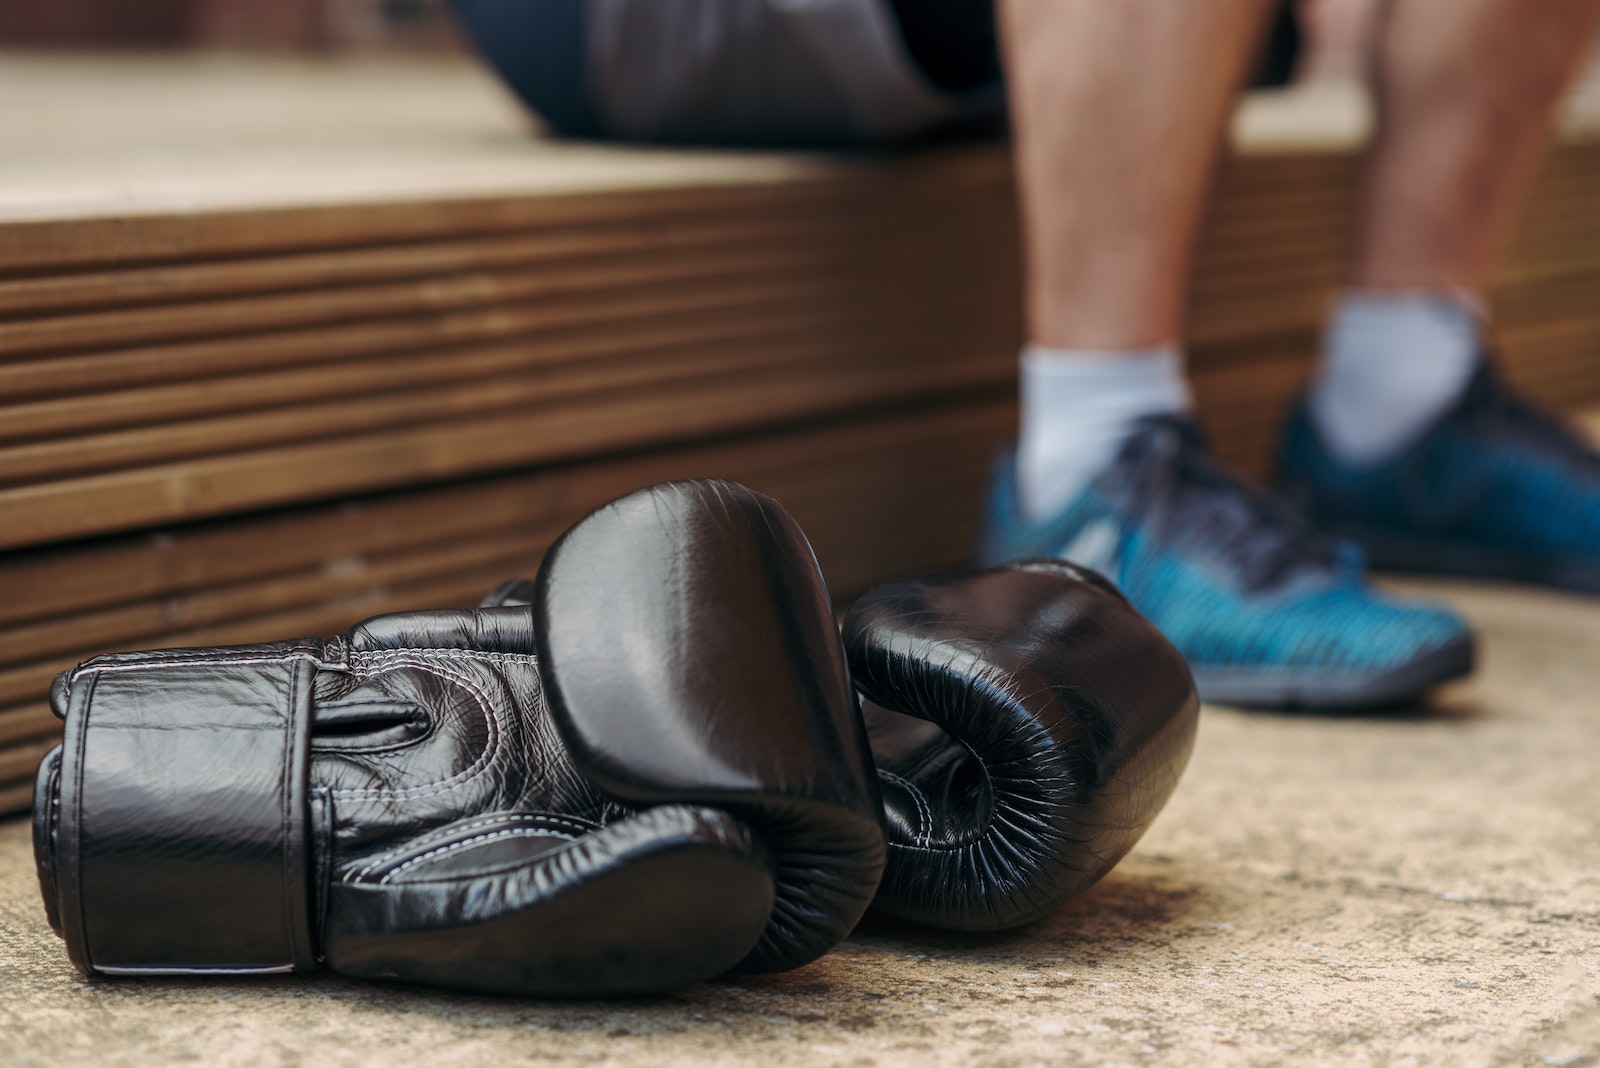 Black Leather Boxing Gloves on the Floor